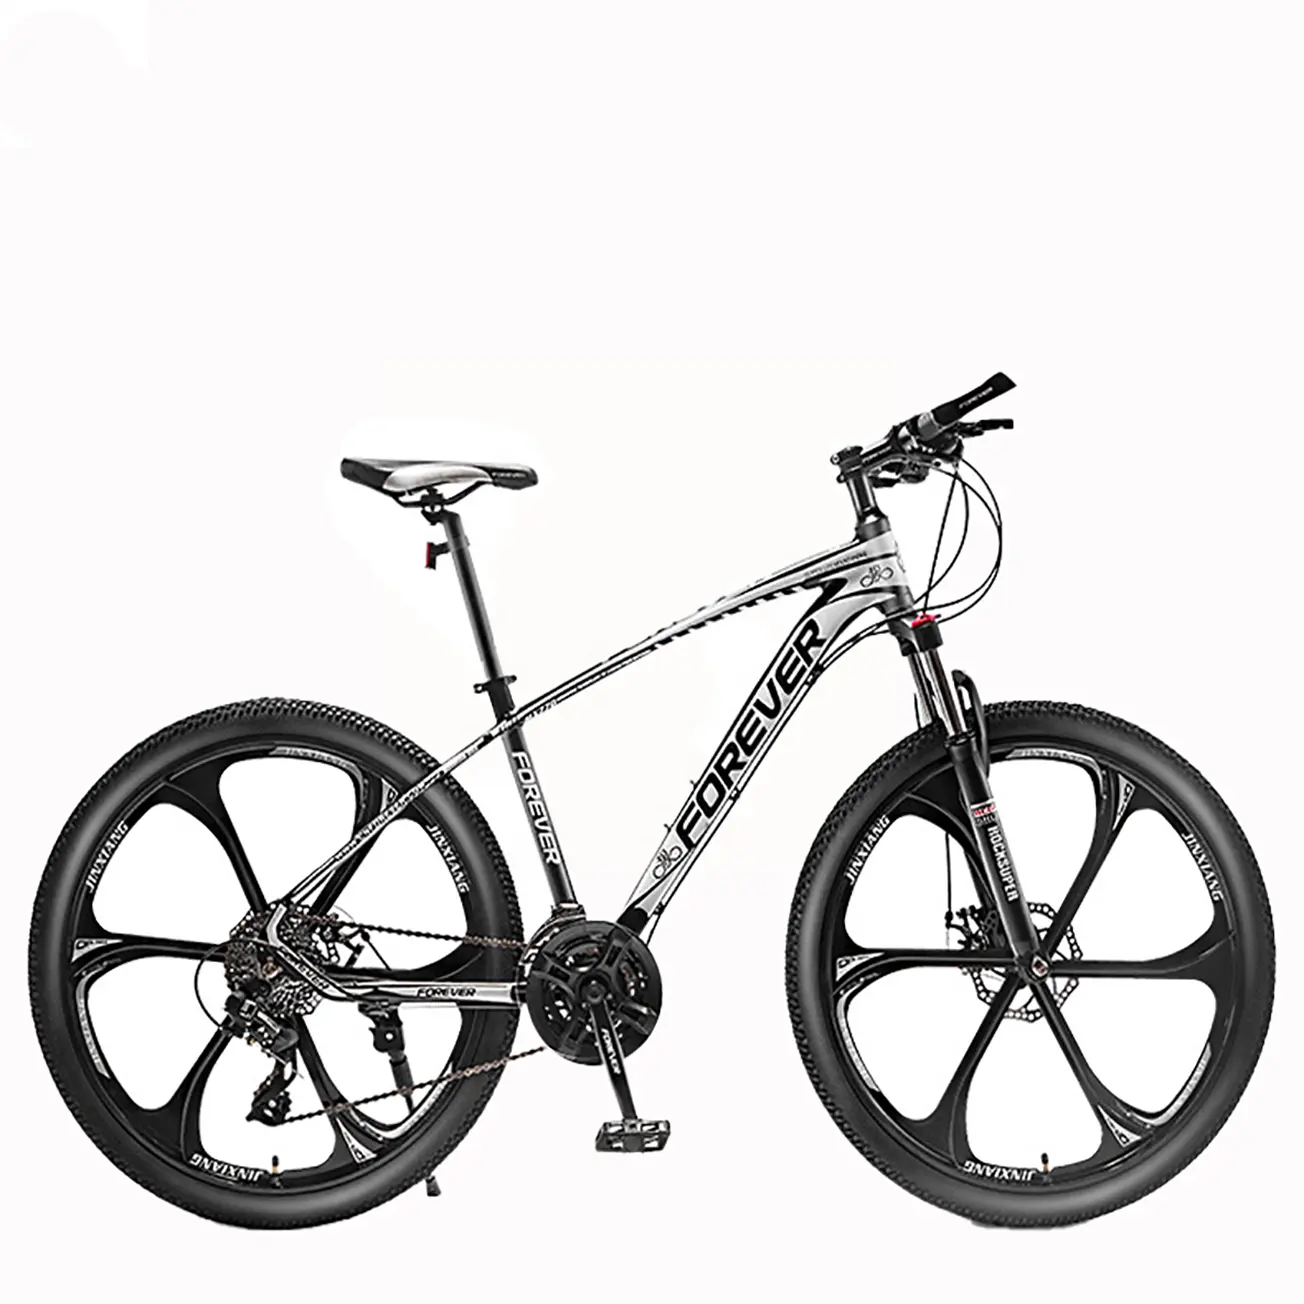 New Popular Alloy Mountain 26 inch Bike Cycle For Men China Bicycle Factory Hot Sale Oem Bicycle